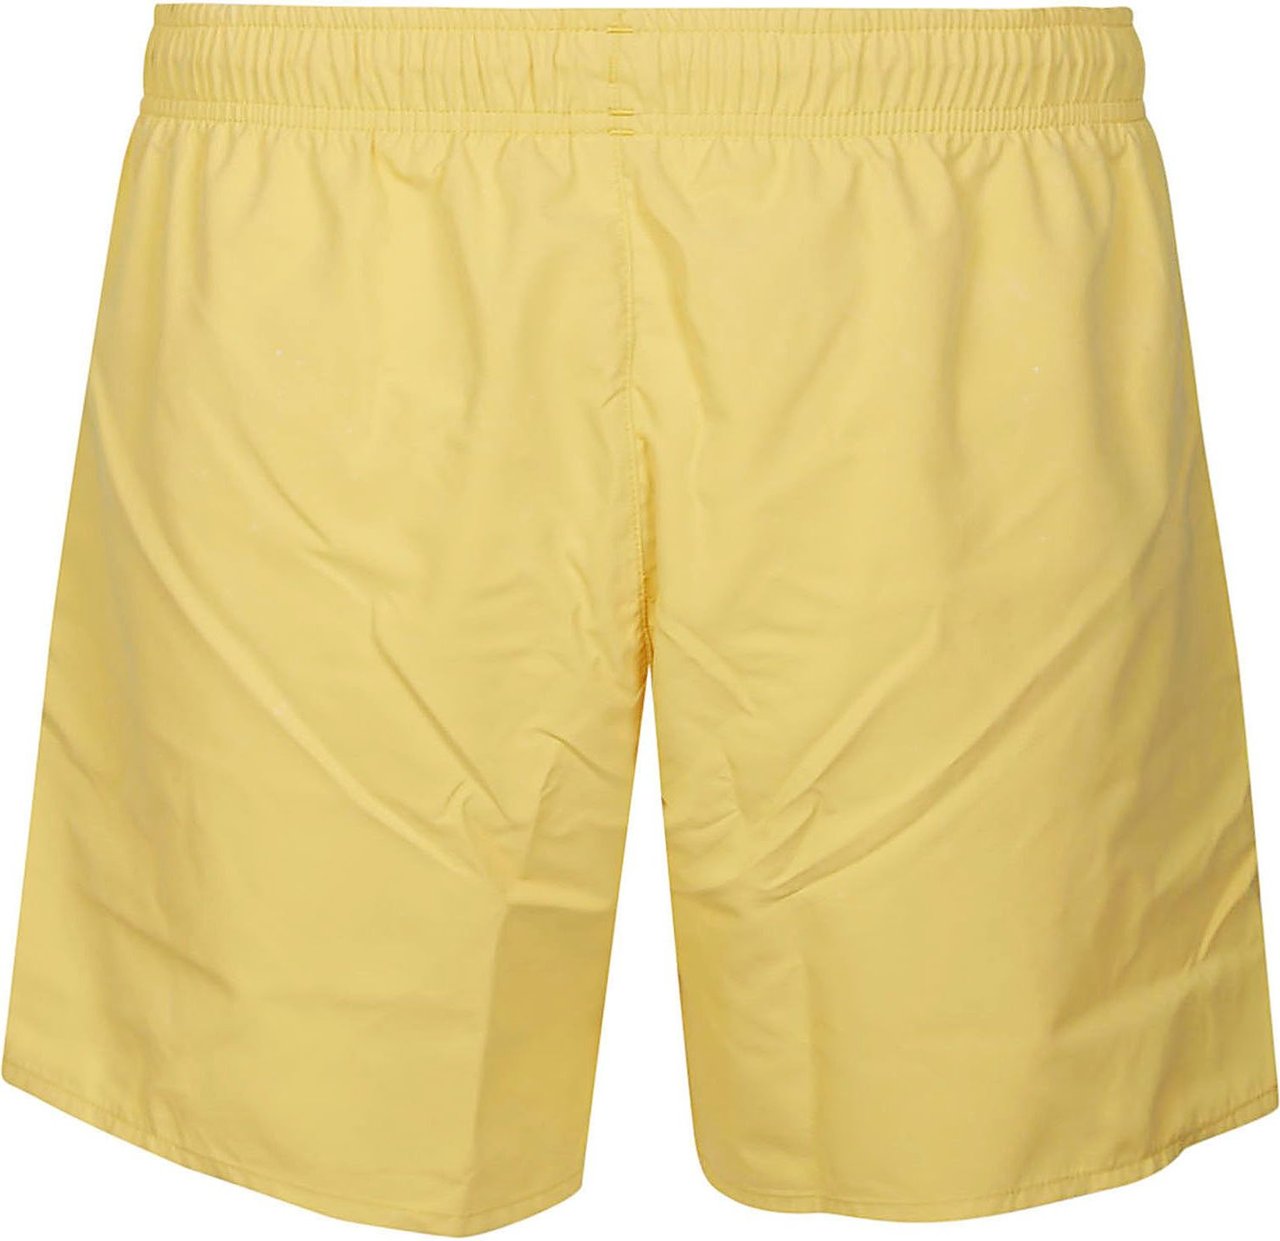 Lacoste Sea Clothing Yellow Geel